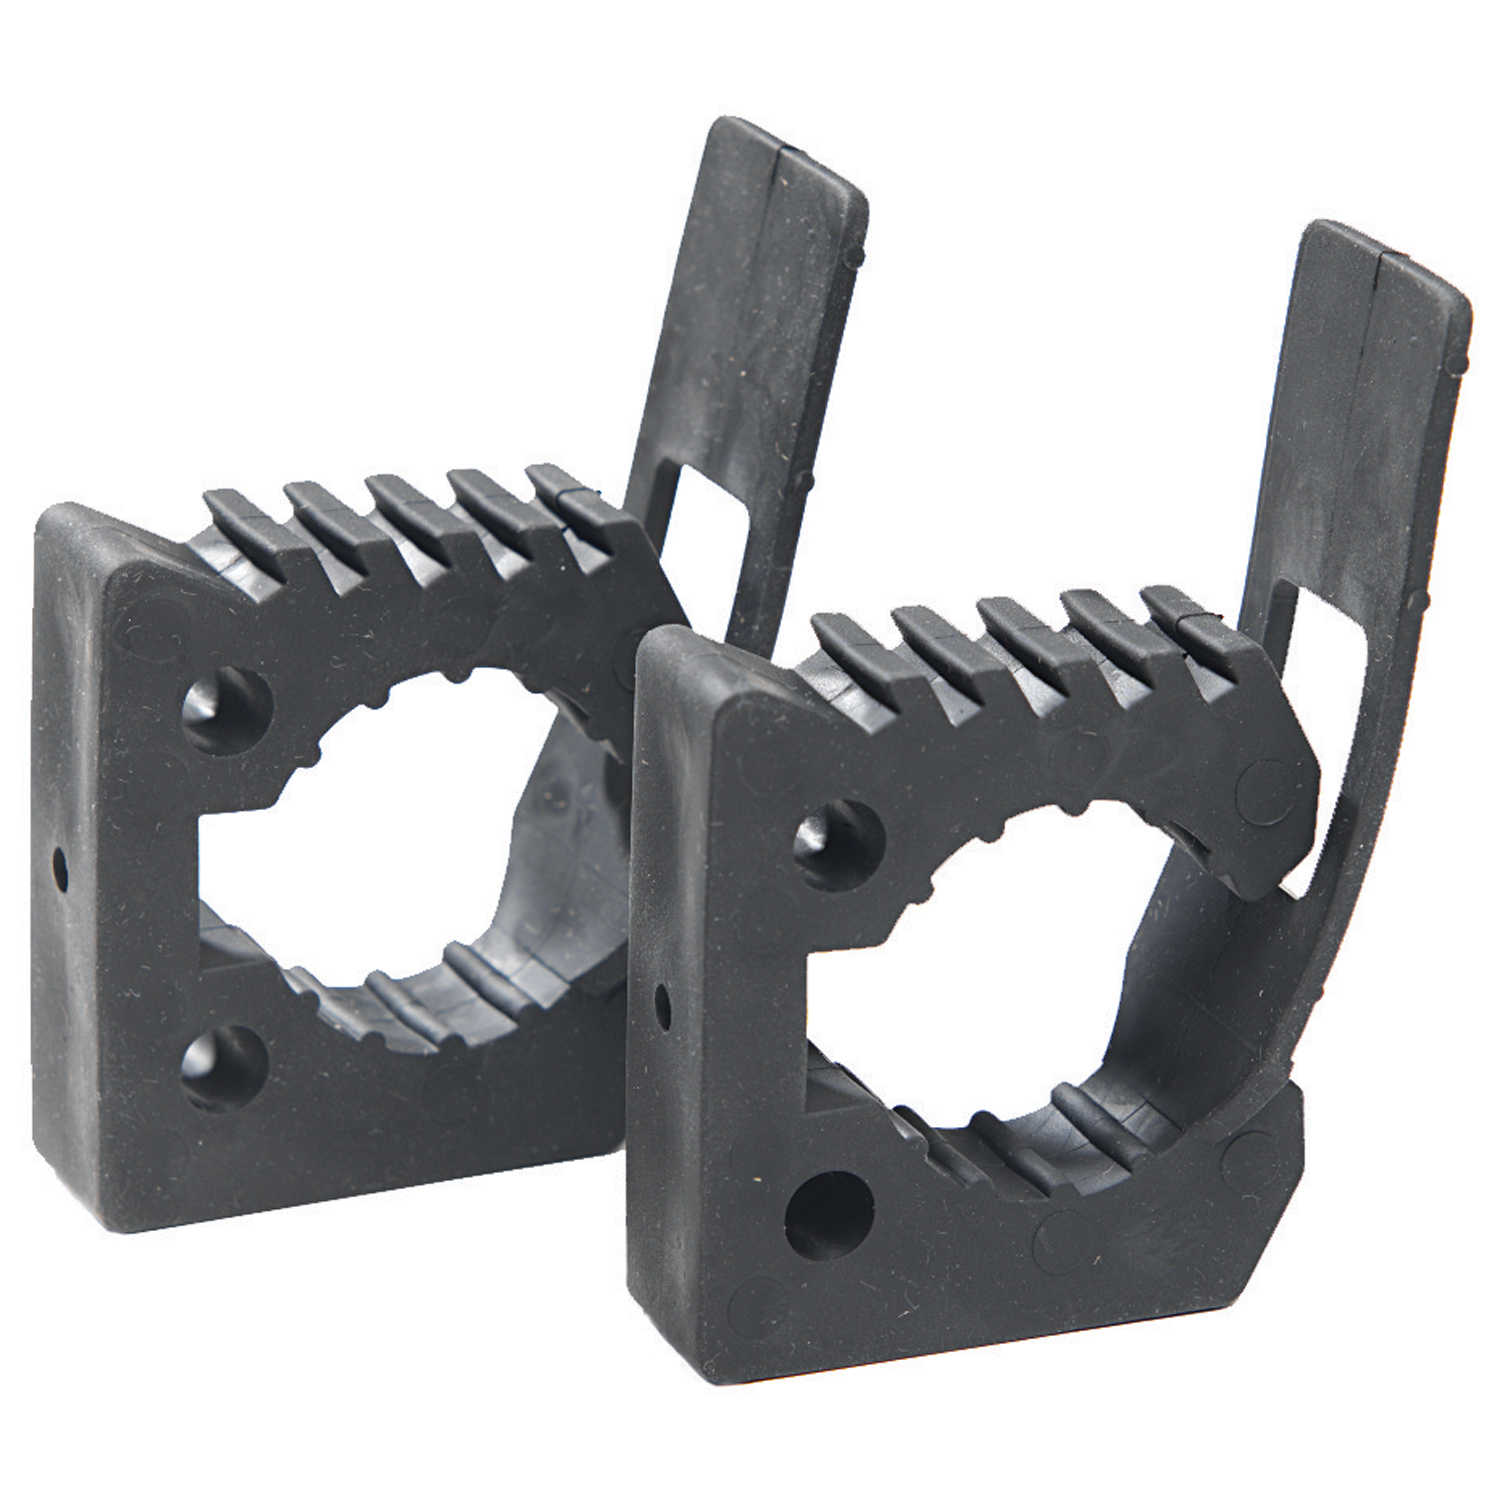 Genuine QuickFist Rubber Clamps with bracket to suit Rhino-Rack Pioneer Platform 